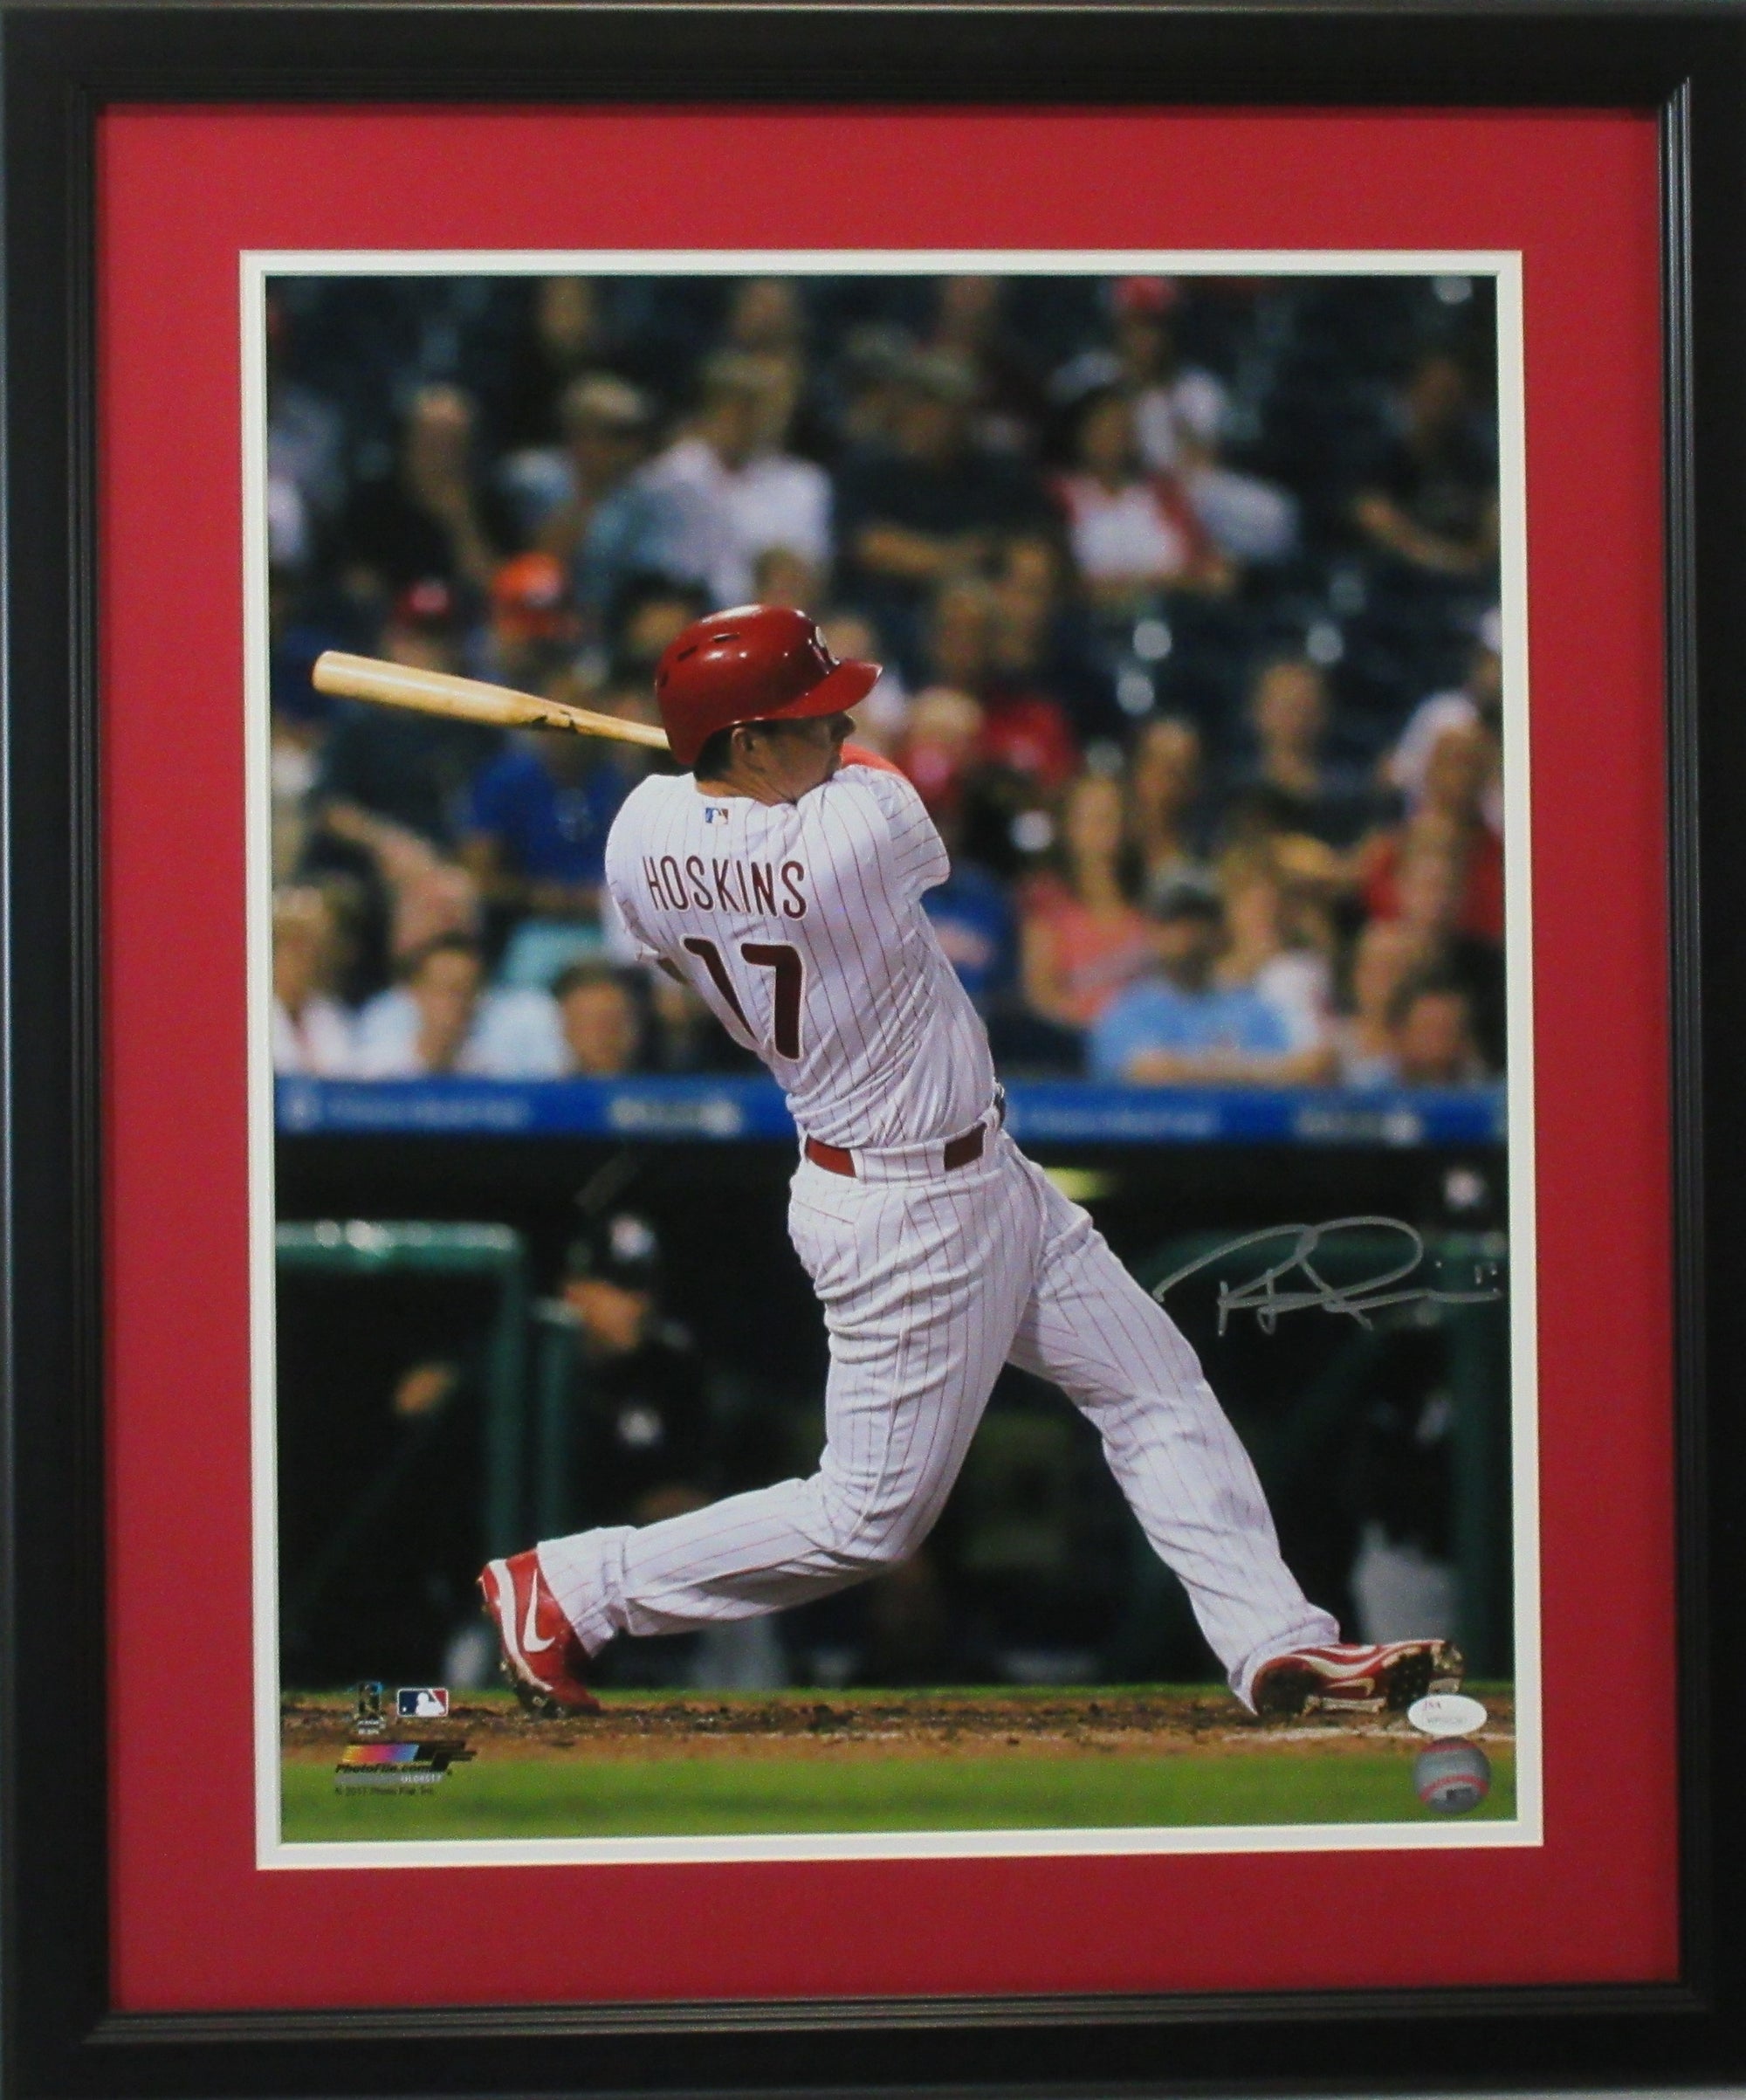 Rhys Hoskins Autographed 16x20 "Pinstriped" Photo Framed